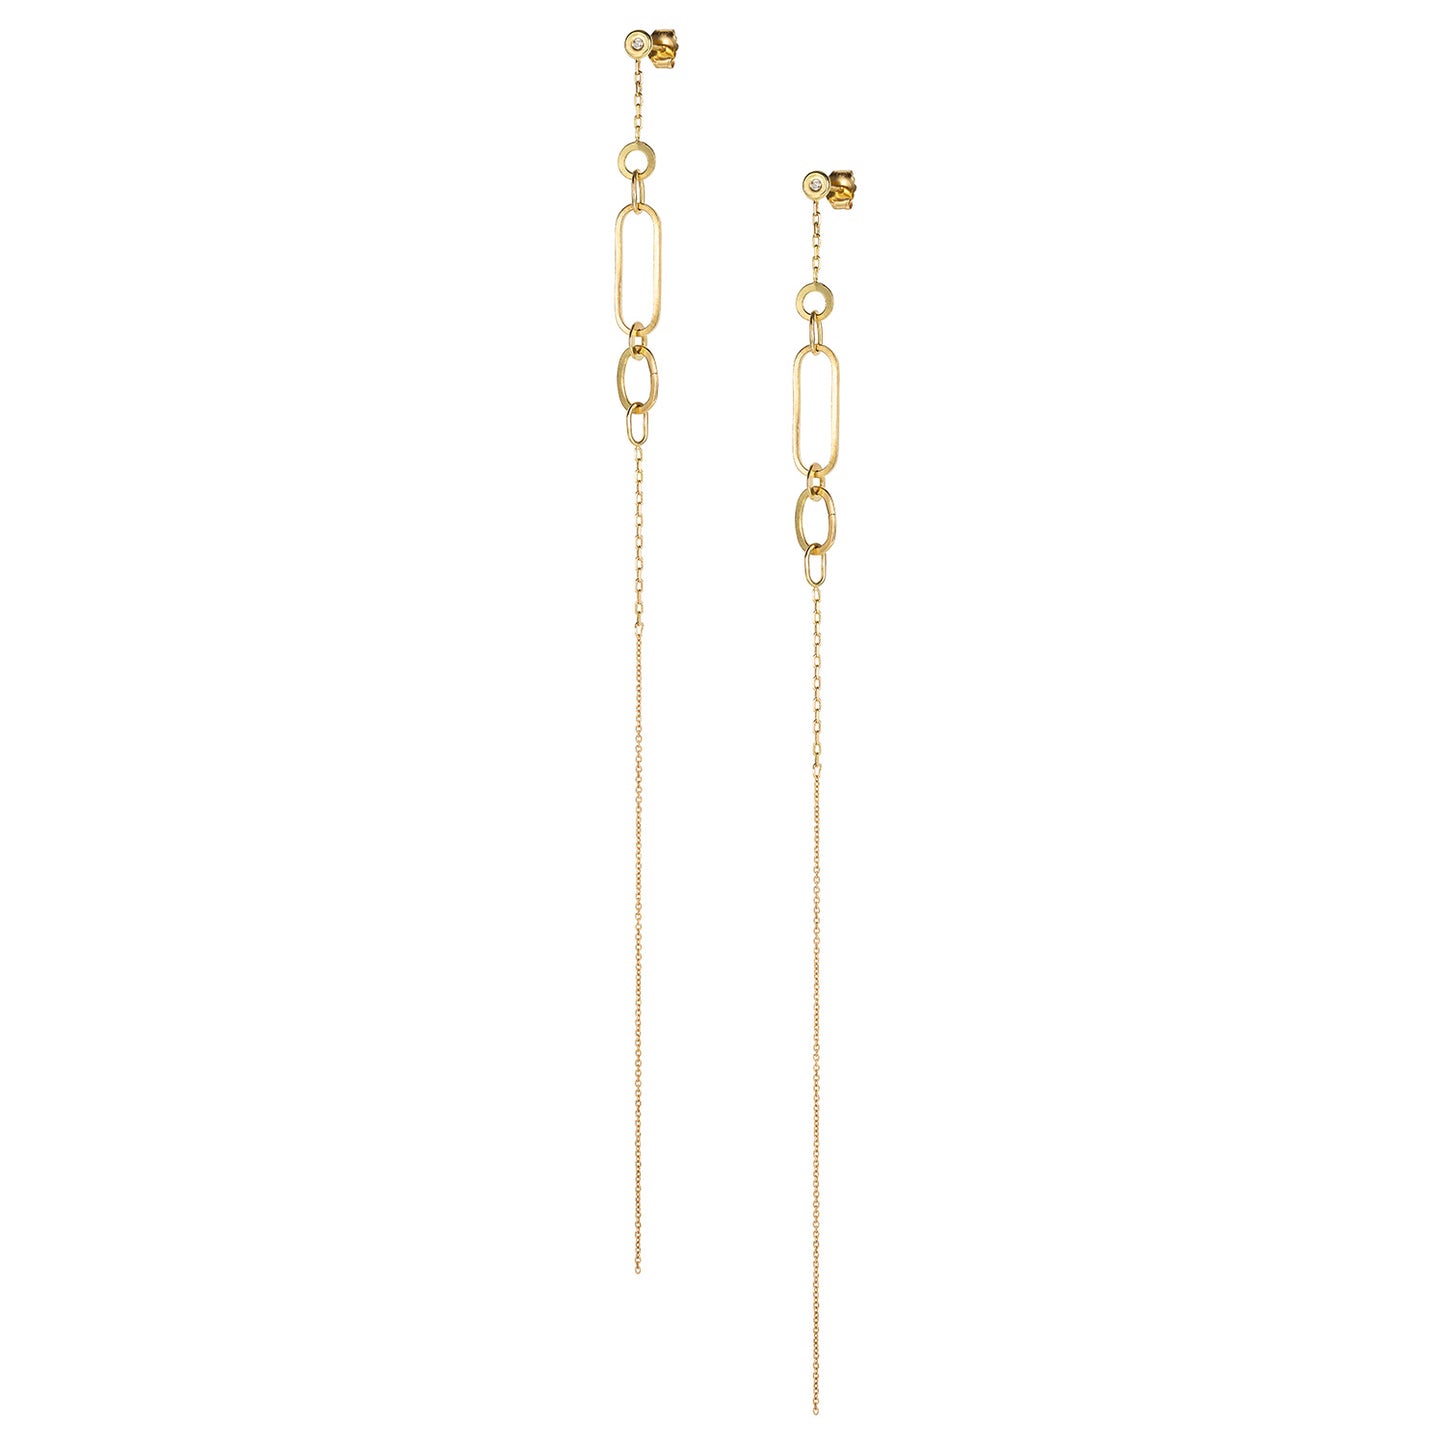 18ct Yellow Gold Diamond stud earrings with long chain wit handmade irregular links. From our Linked With Love collection.